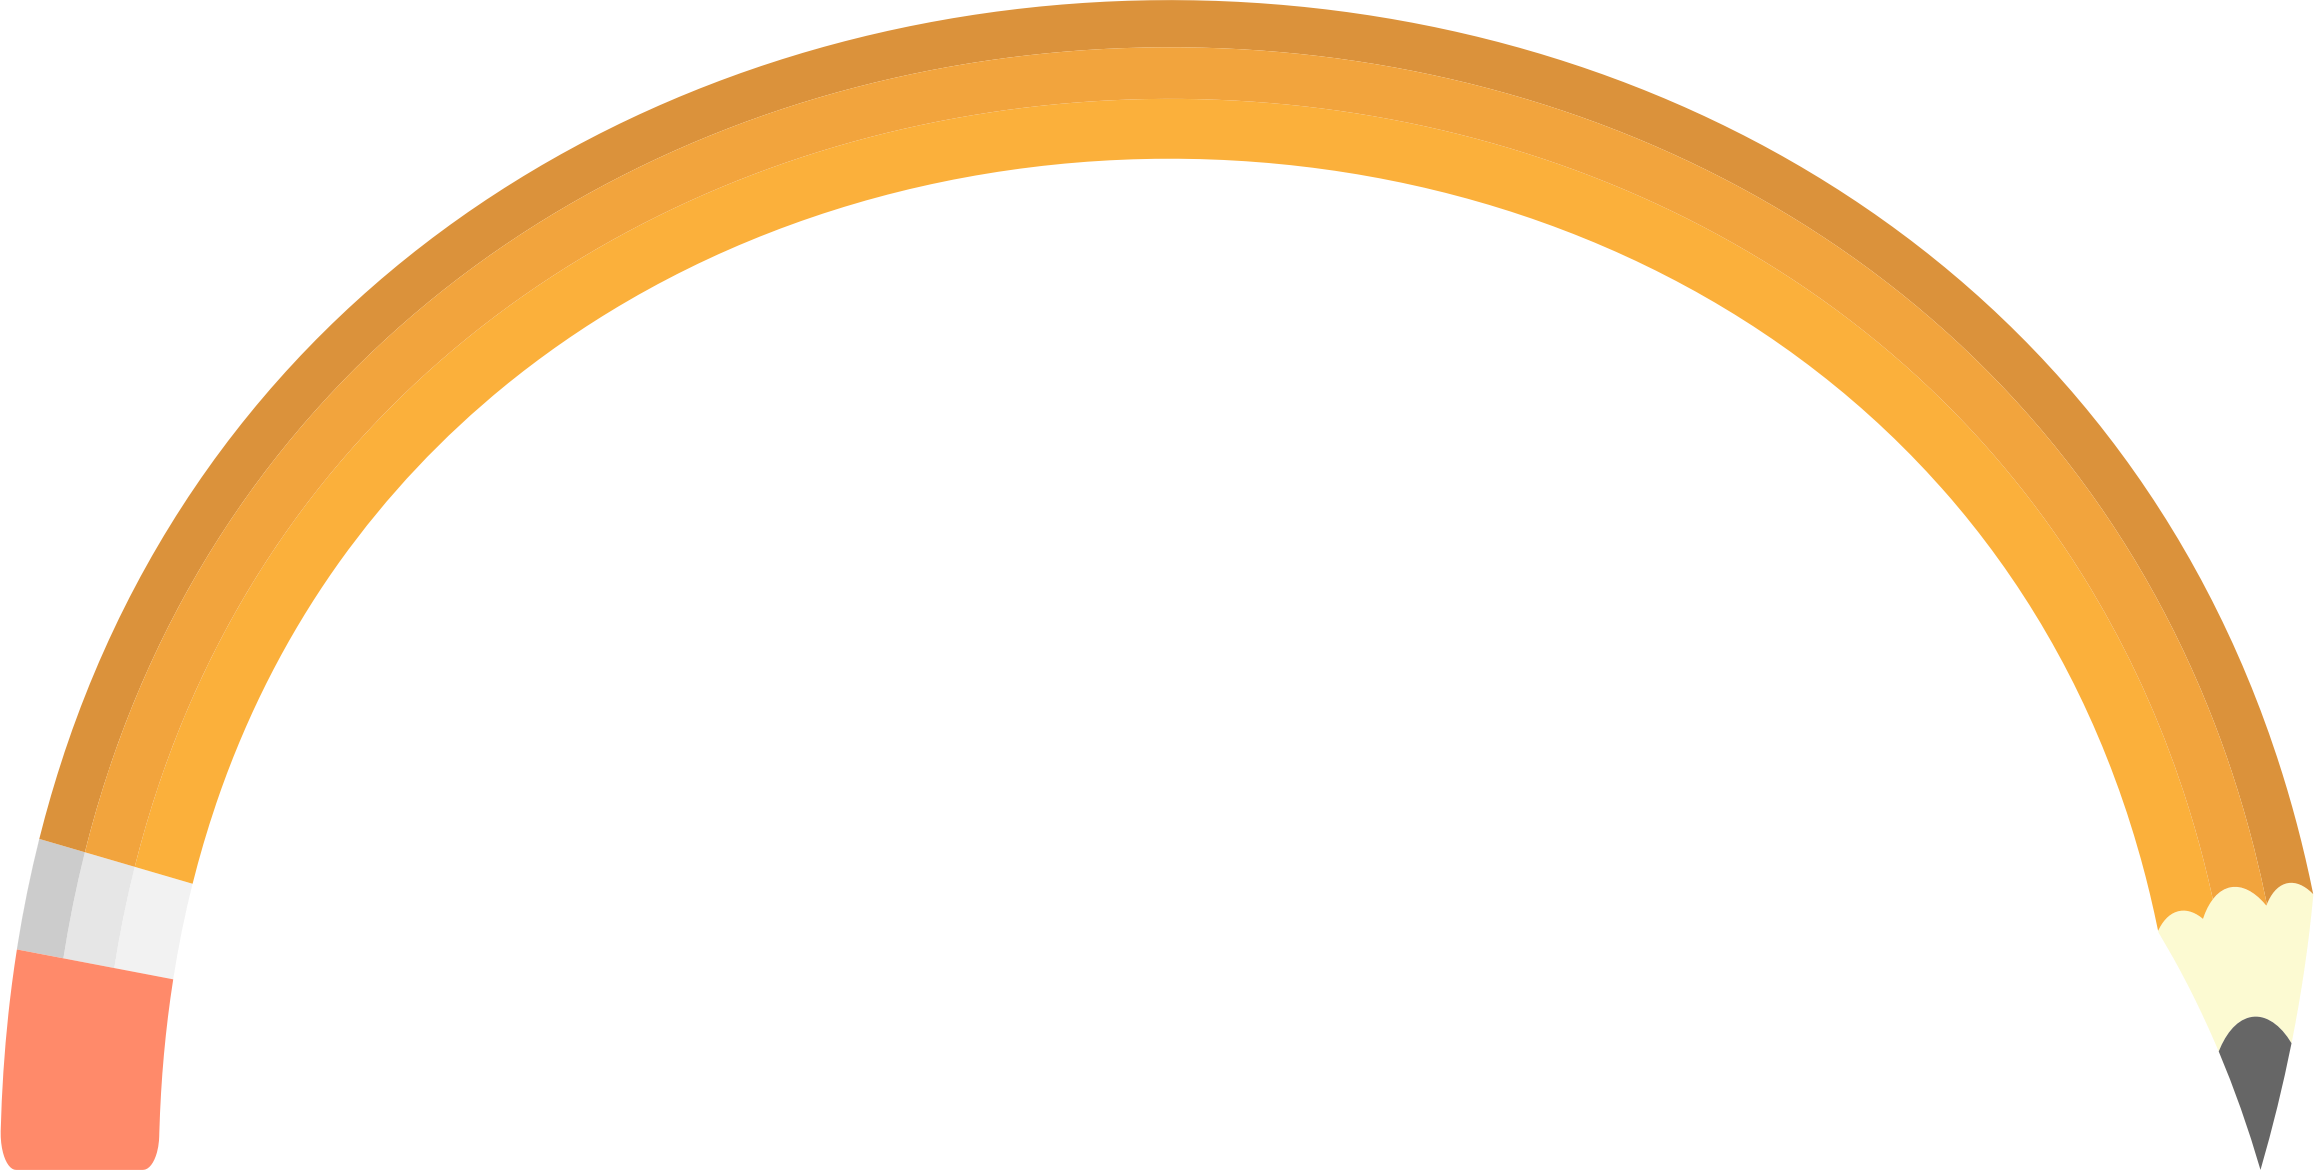 Pencil Arch - Pencil In Circle Png (2314x1170)